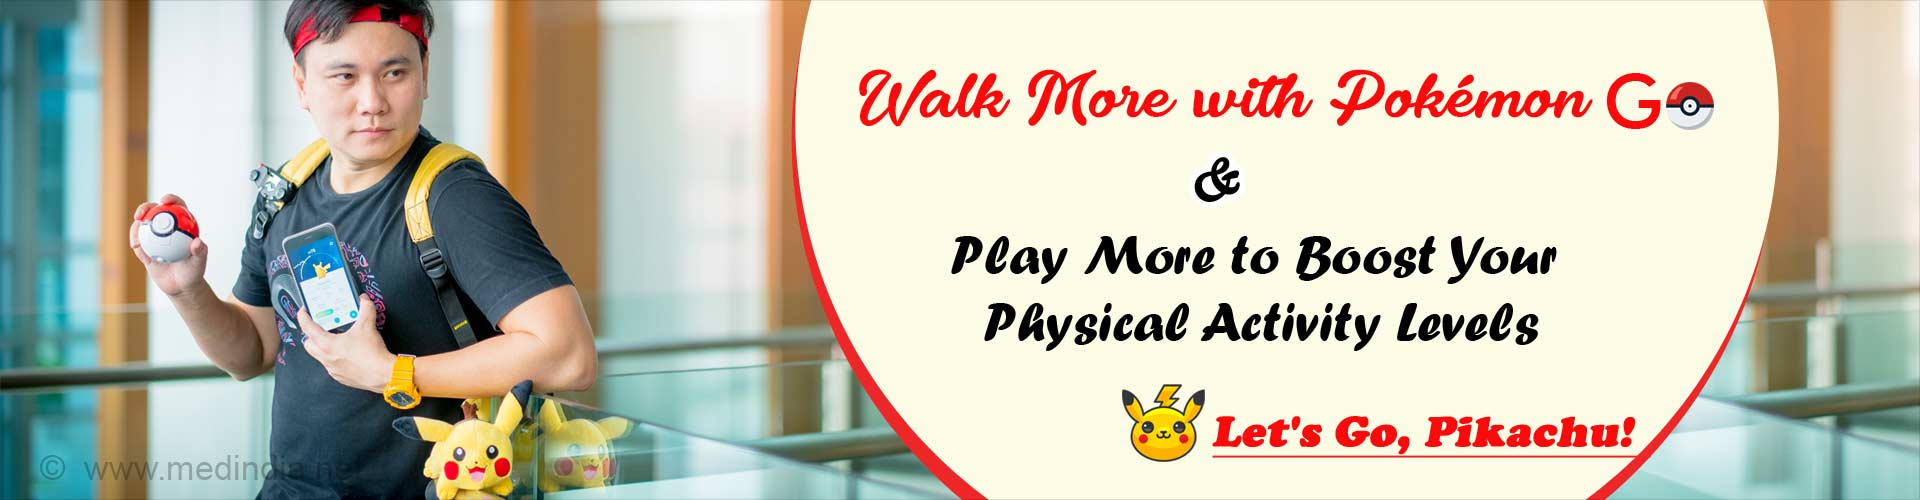 Walk more with Pokémon GO and play more to boost your physical activity levels. Let's Go, Pikachu!.